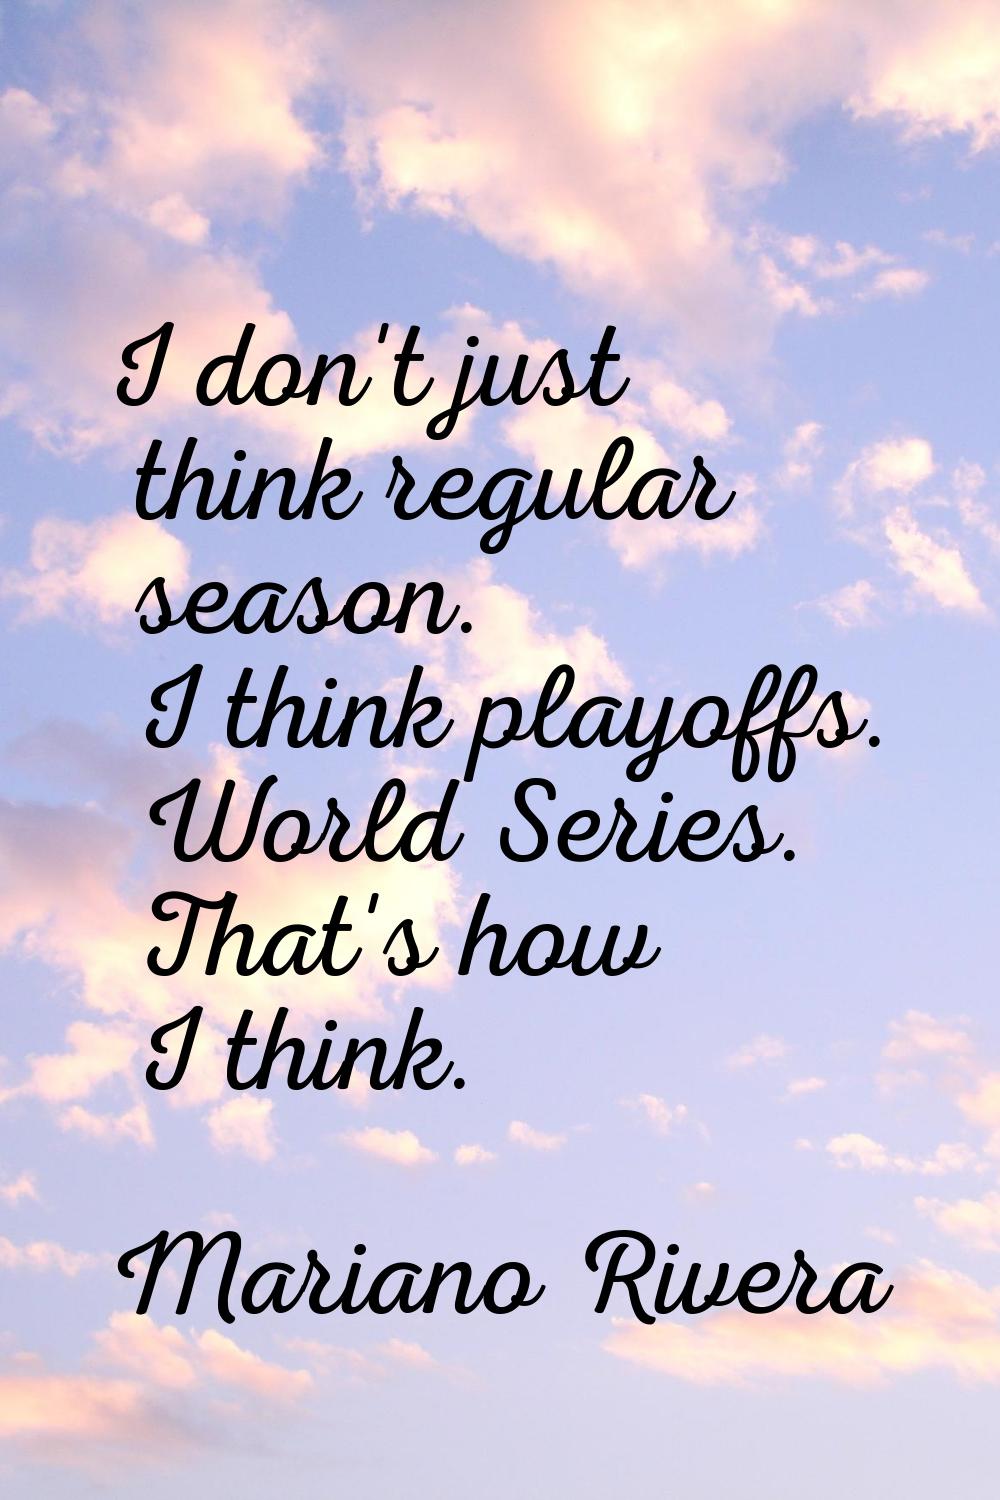 I don't just think regular season. I think playoffs. World Series. That's how I think.